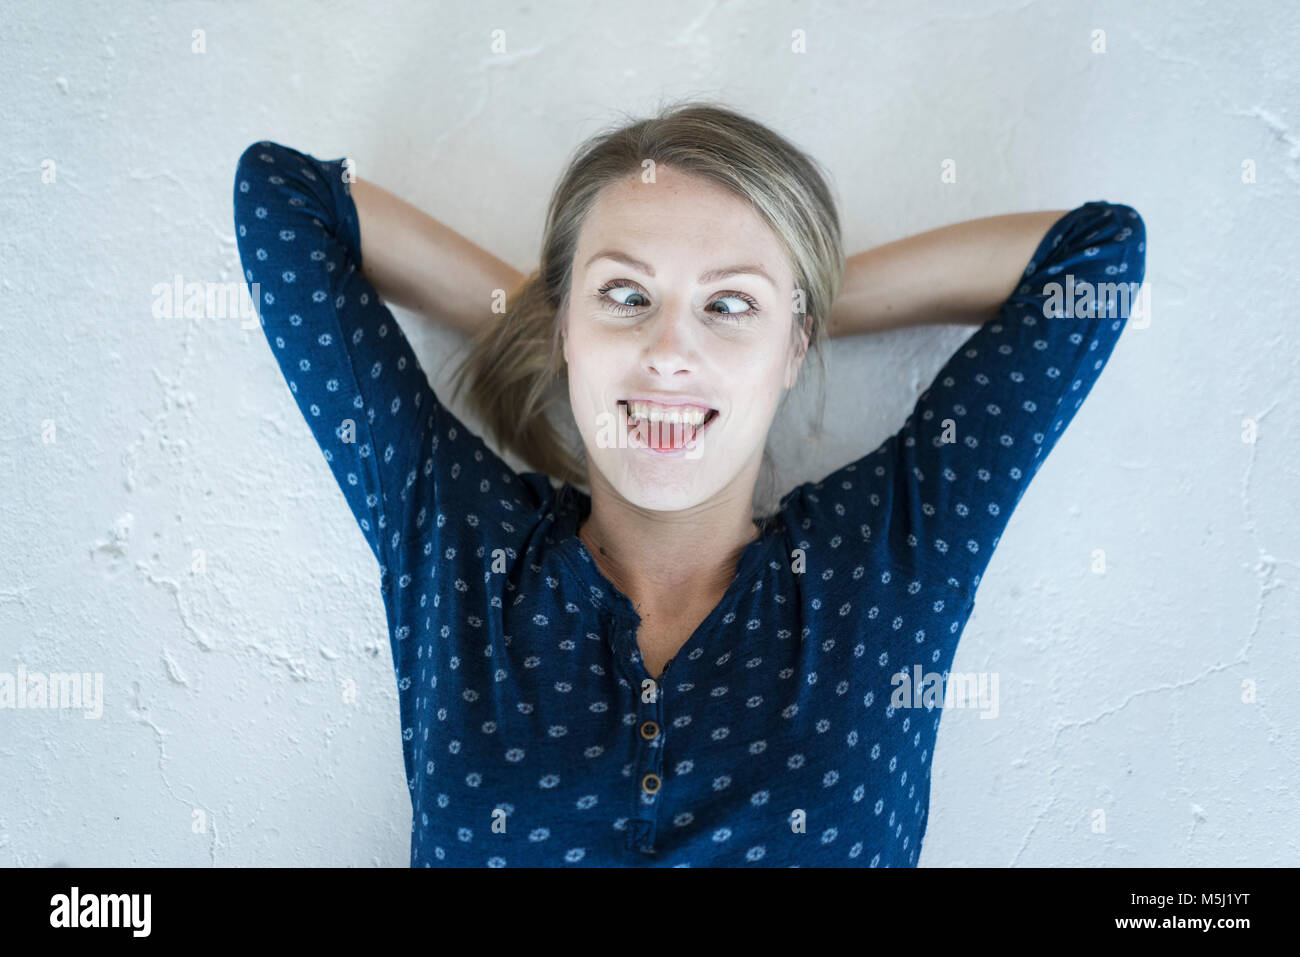 Portrait of young woman lying on the floor pulling funny faces Stock Photo